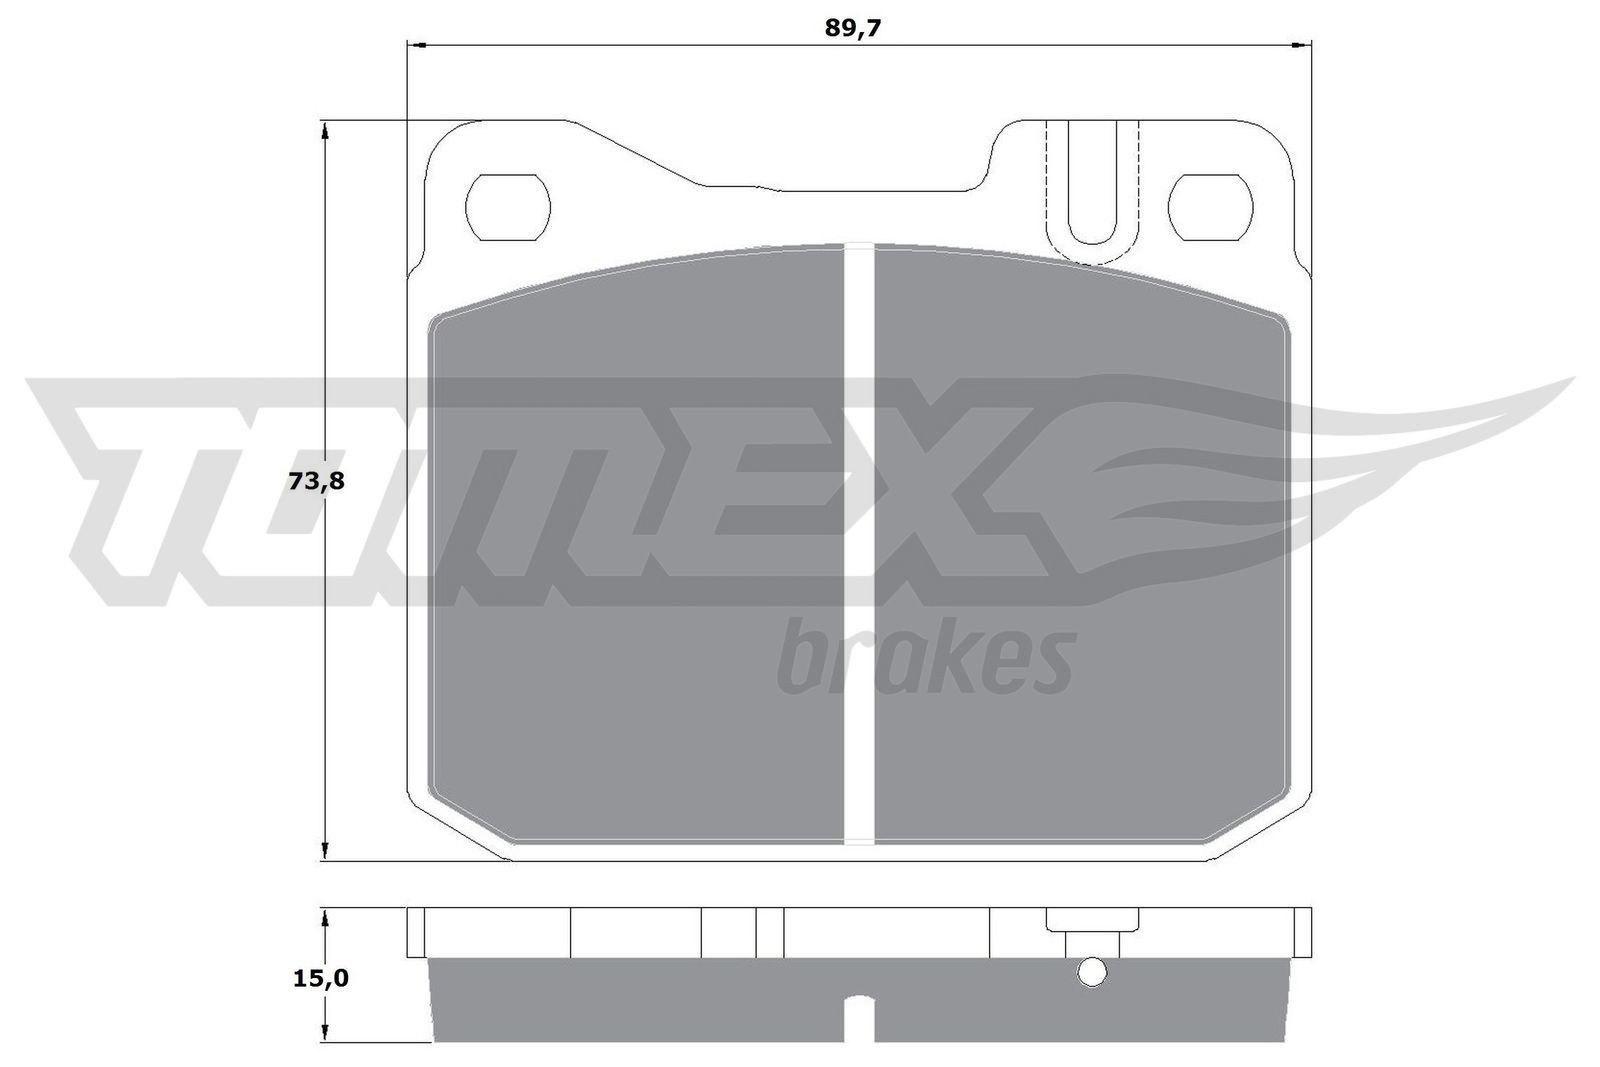 10-22 TOMEX brakes Front Axle, prepared for wear indicator Height: 73,8mm, Width: 89,7mm, Thickness: 15mm Brake pads TX 10-22 buy